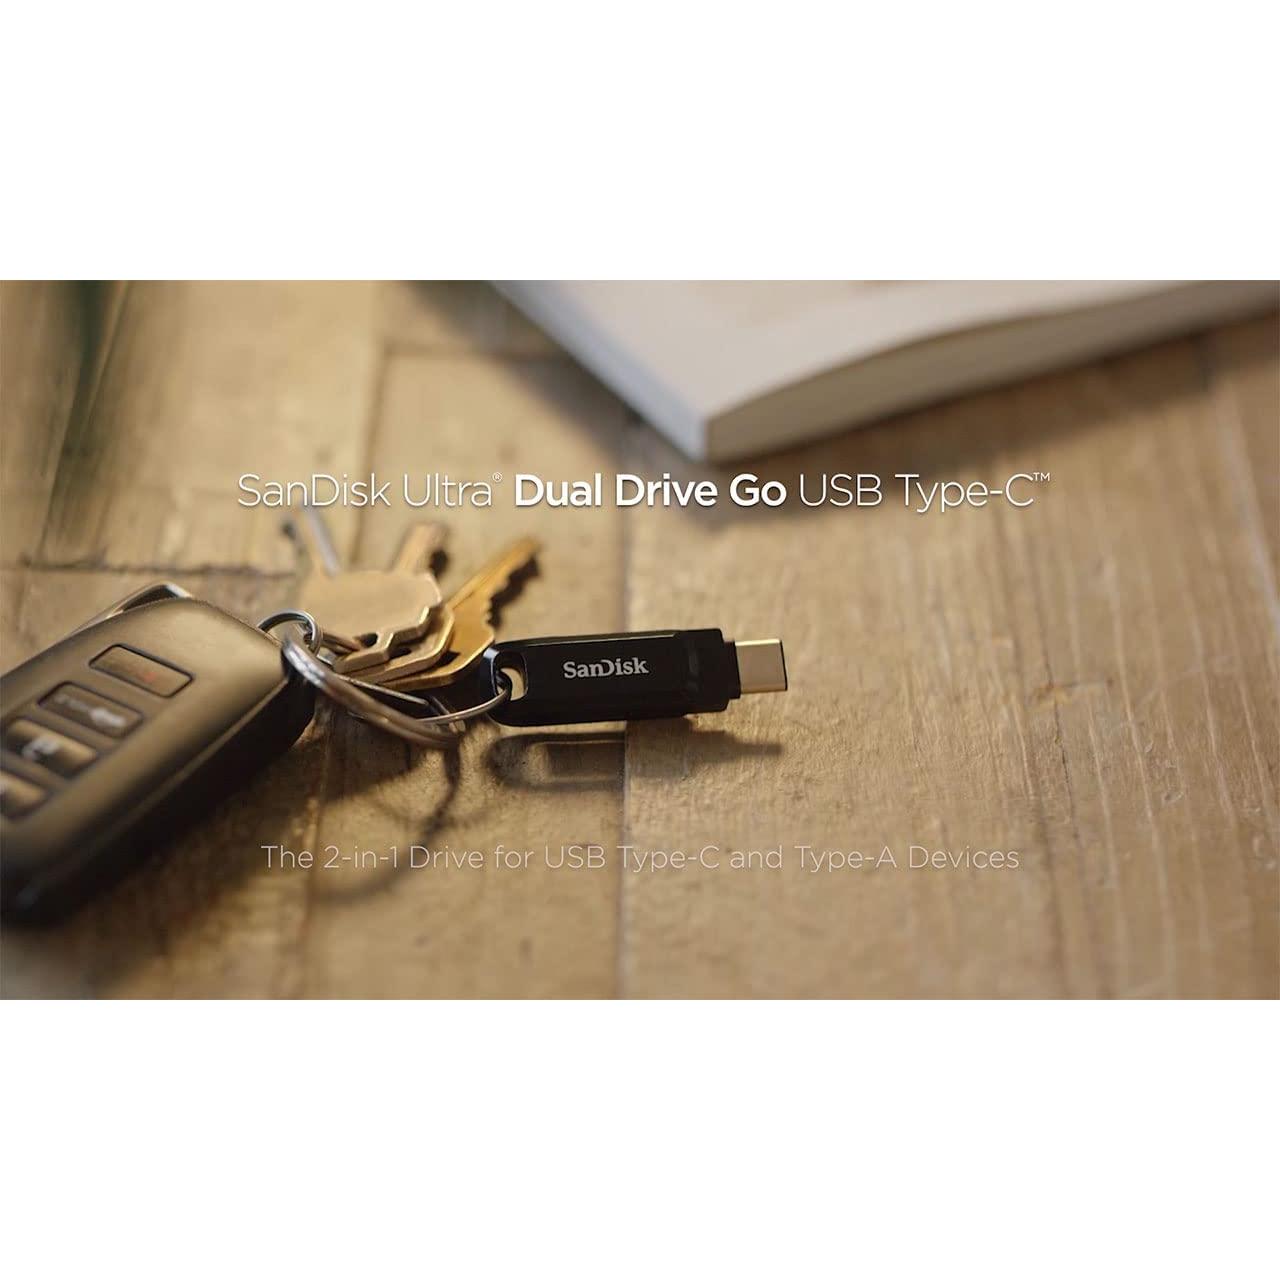 SanDisk Ultra Dual Drive Go USB Type C and Type A Flash Drive - NLMAX